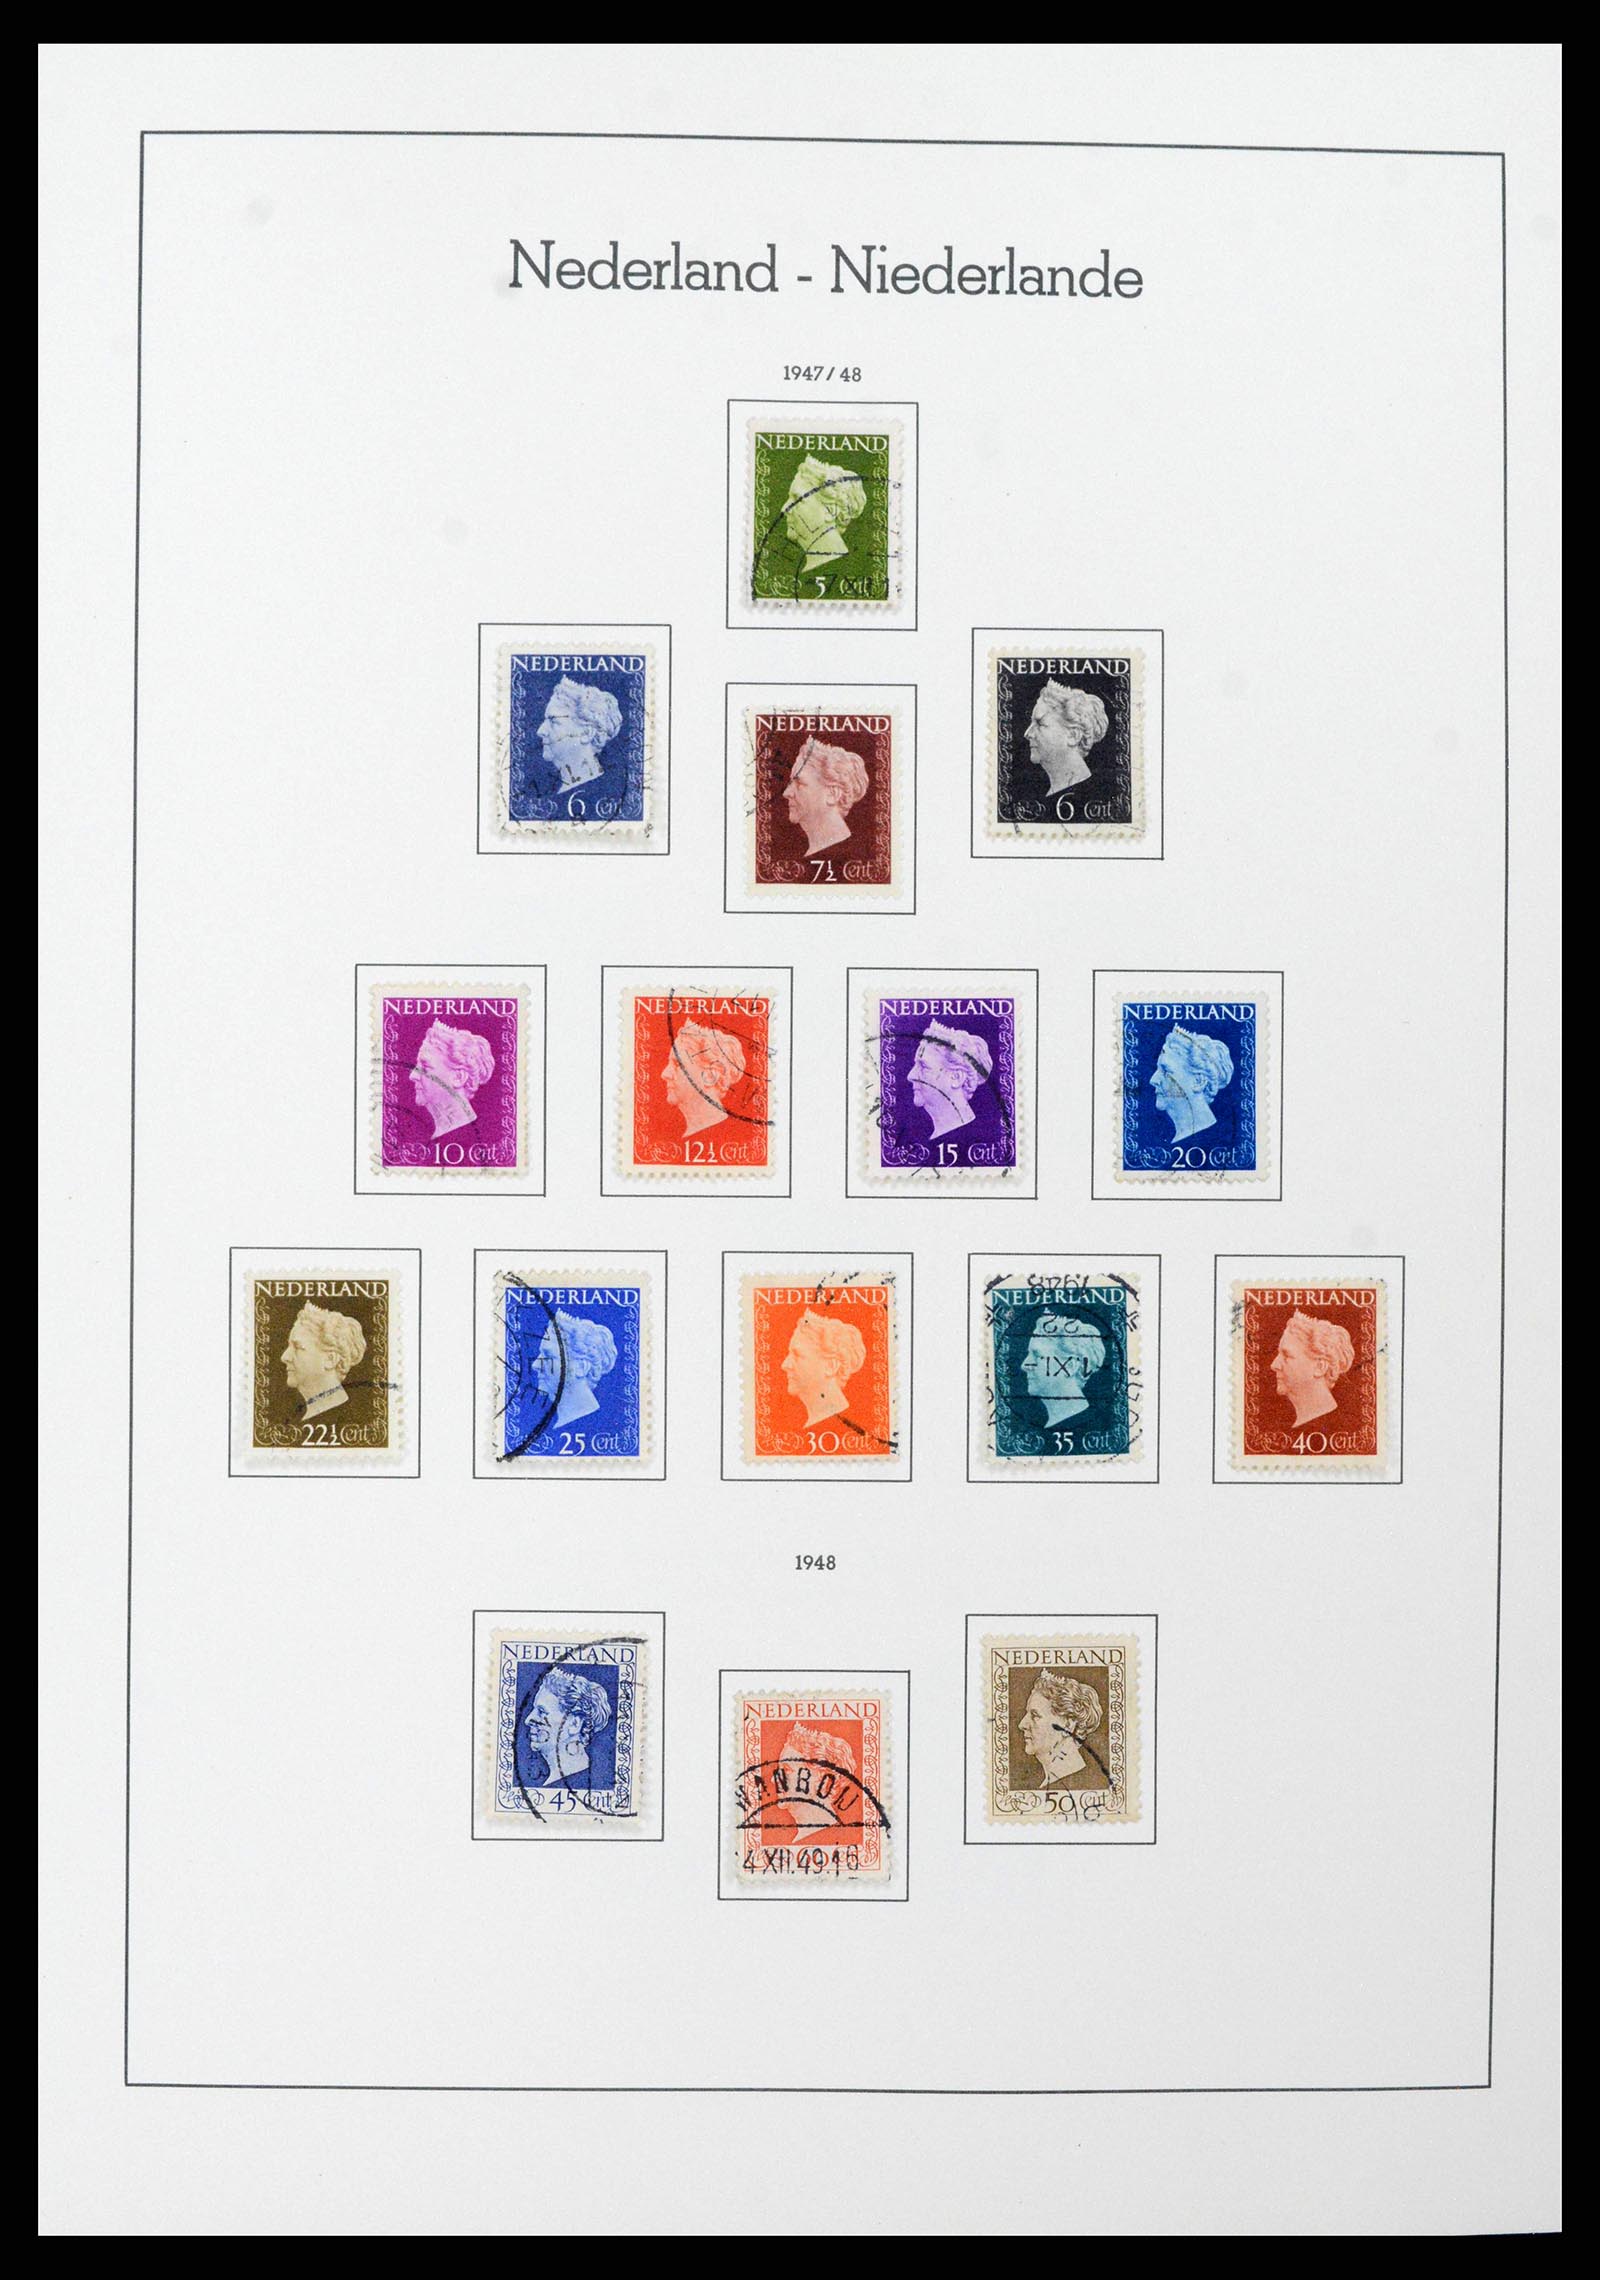 38841 0038 - Stamp collection 38841 Netherlands 1852-1986.